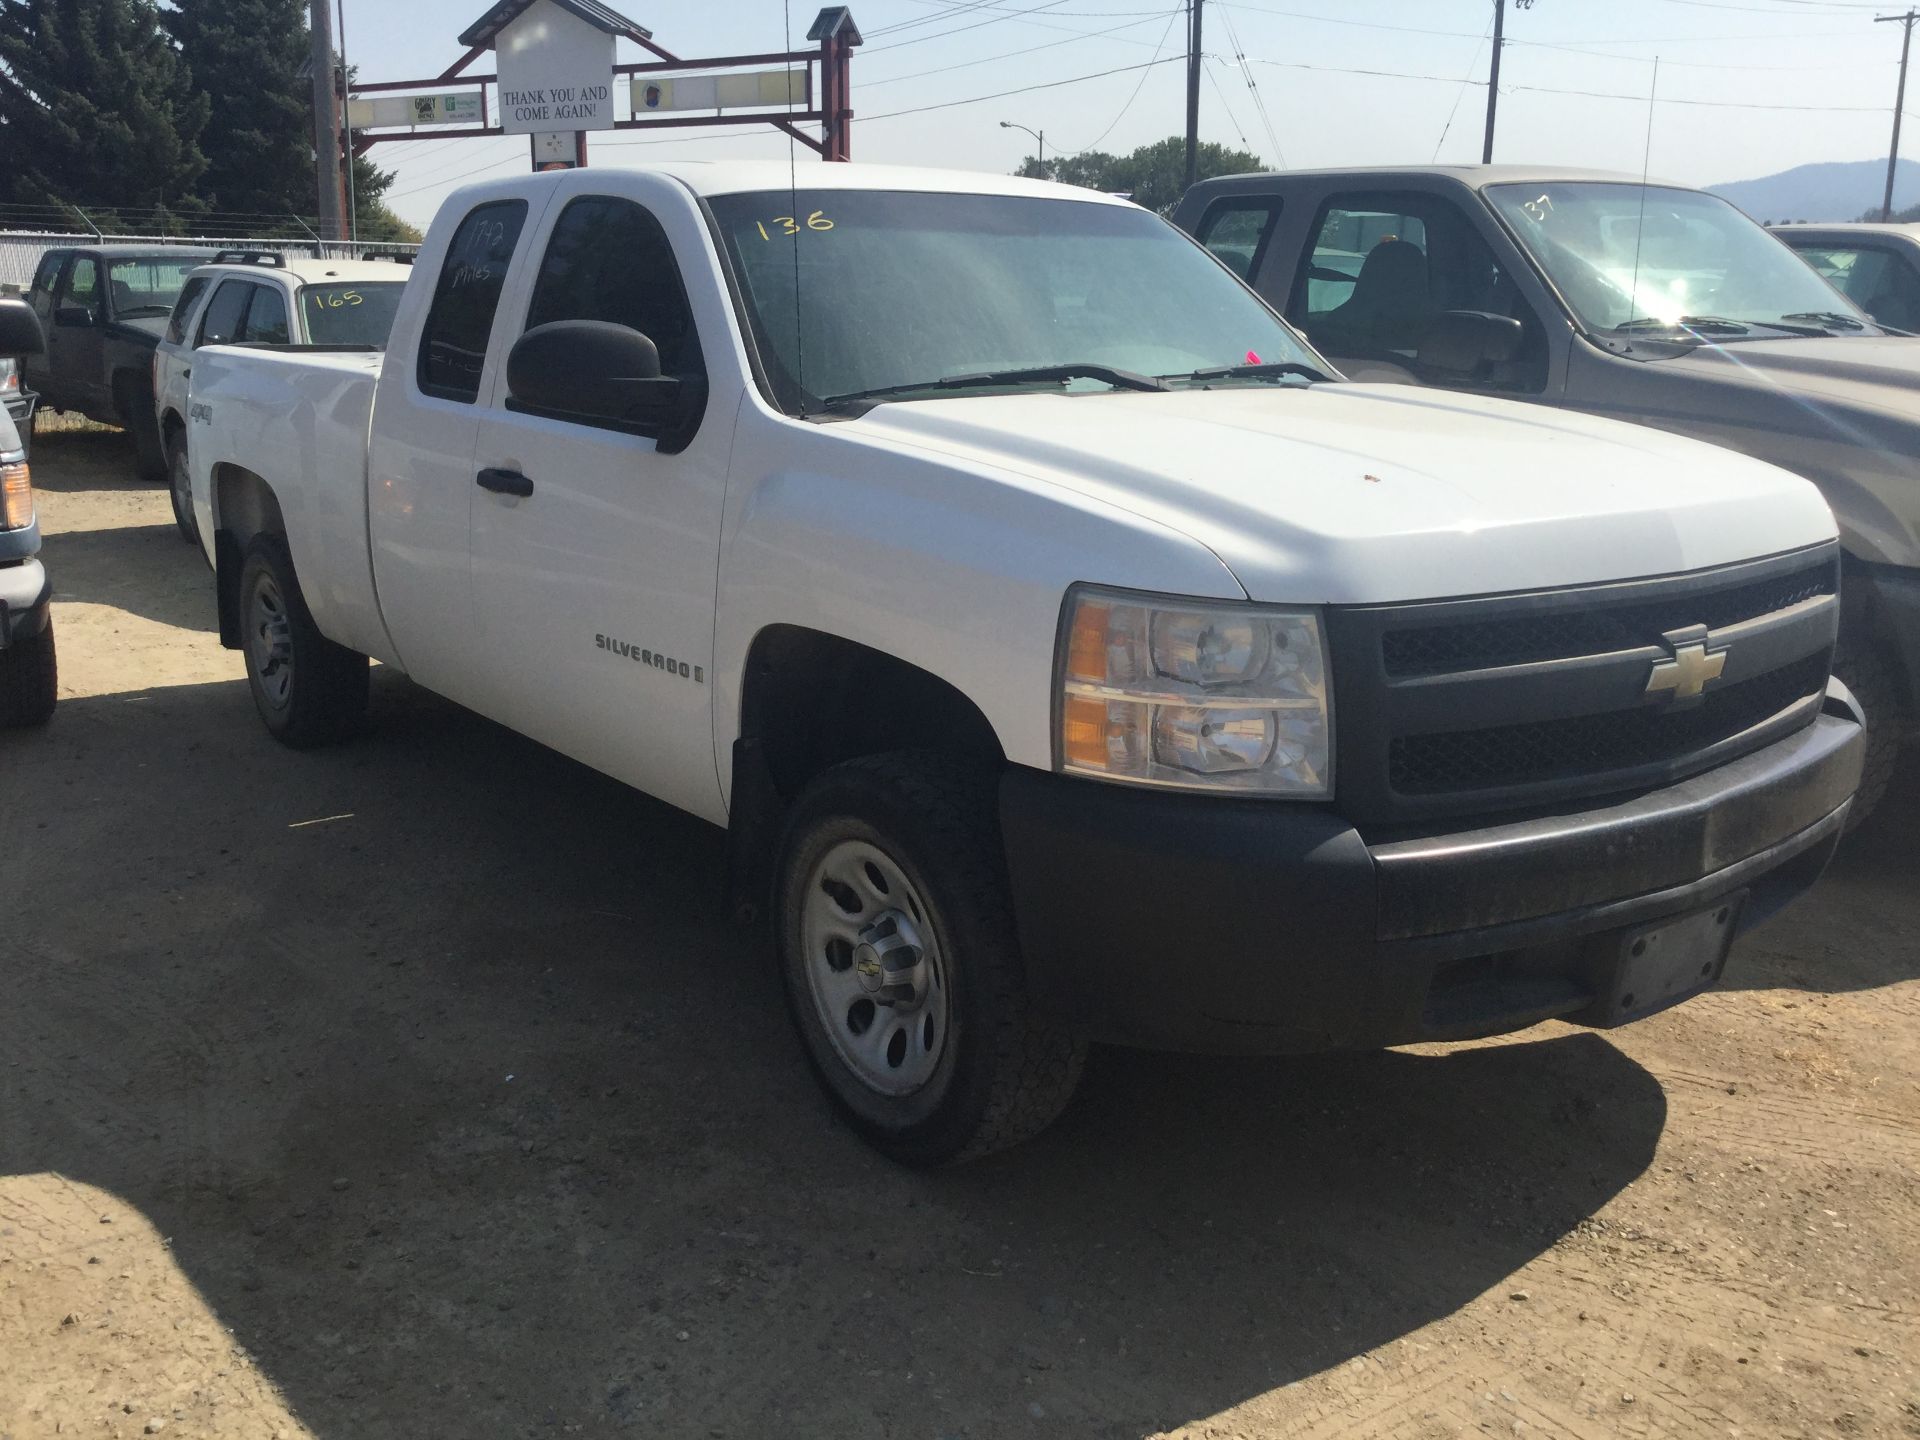 Year: 2007 Make: Chevy Model: 1/2T Type: Pickup Vin#: 532595 Mileage/Hours: 191000 4.8L, 4x4, XC, - Image 3 of 4